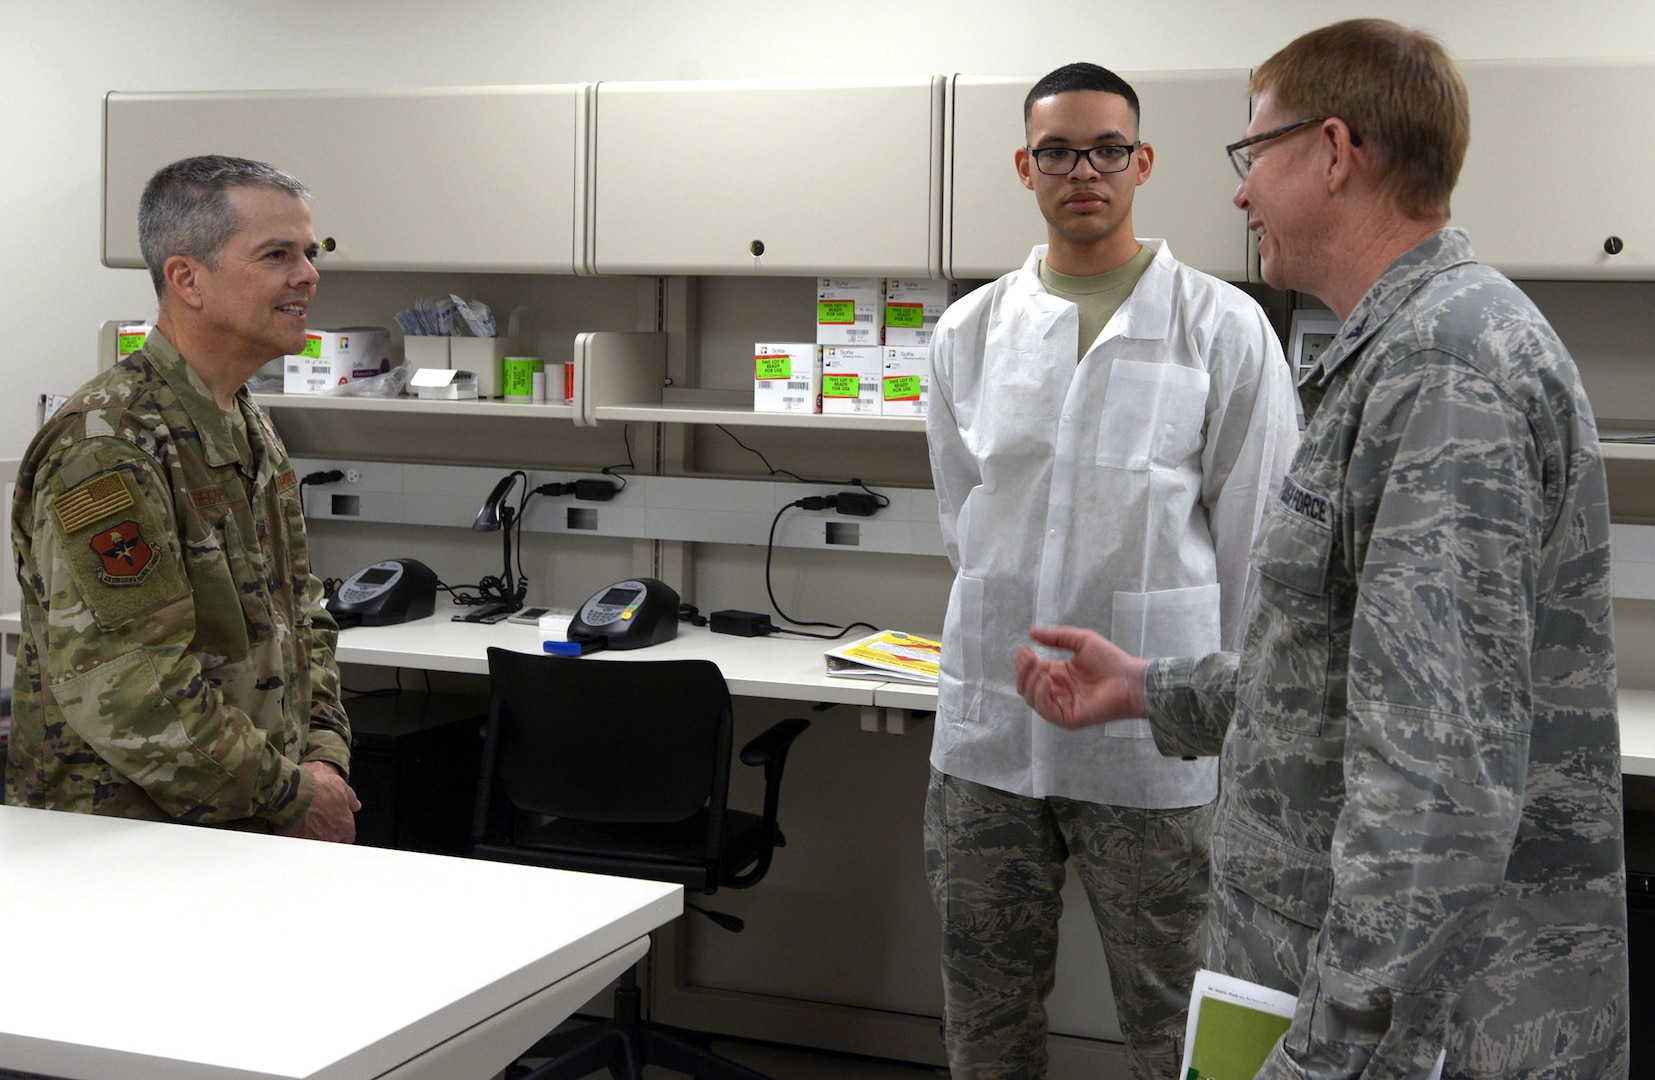 Maj. Gen. John J. DeGoes (left), 59th Medical Wing commander, speaks about the capabilities of the Gateway Bulverde Clinic with Col. Robert Bogart (right), 59th Medical Operations Group commander, and Senior Airman Noah Williams (center), 59th MDW laboratory technician Jan. 25. The Gateway Bulverde Clinic features comprehensive family health care with on-site laboratory and pharmacy services.